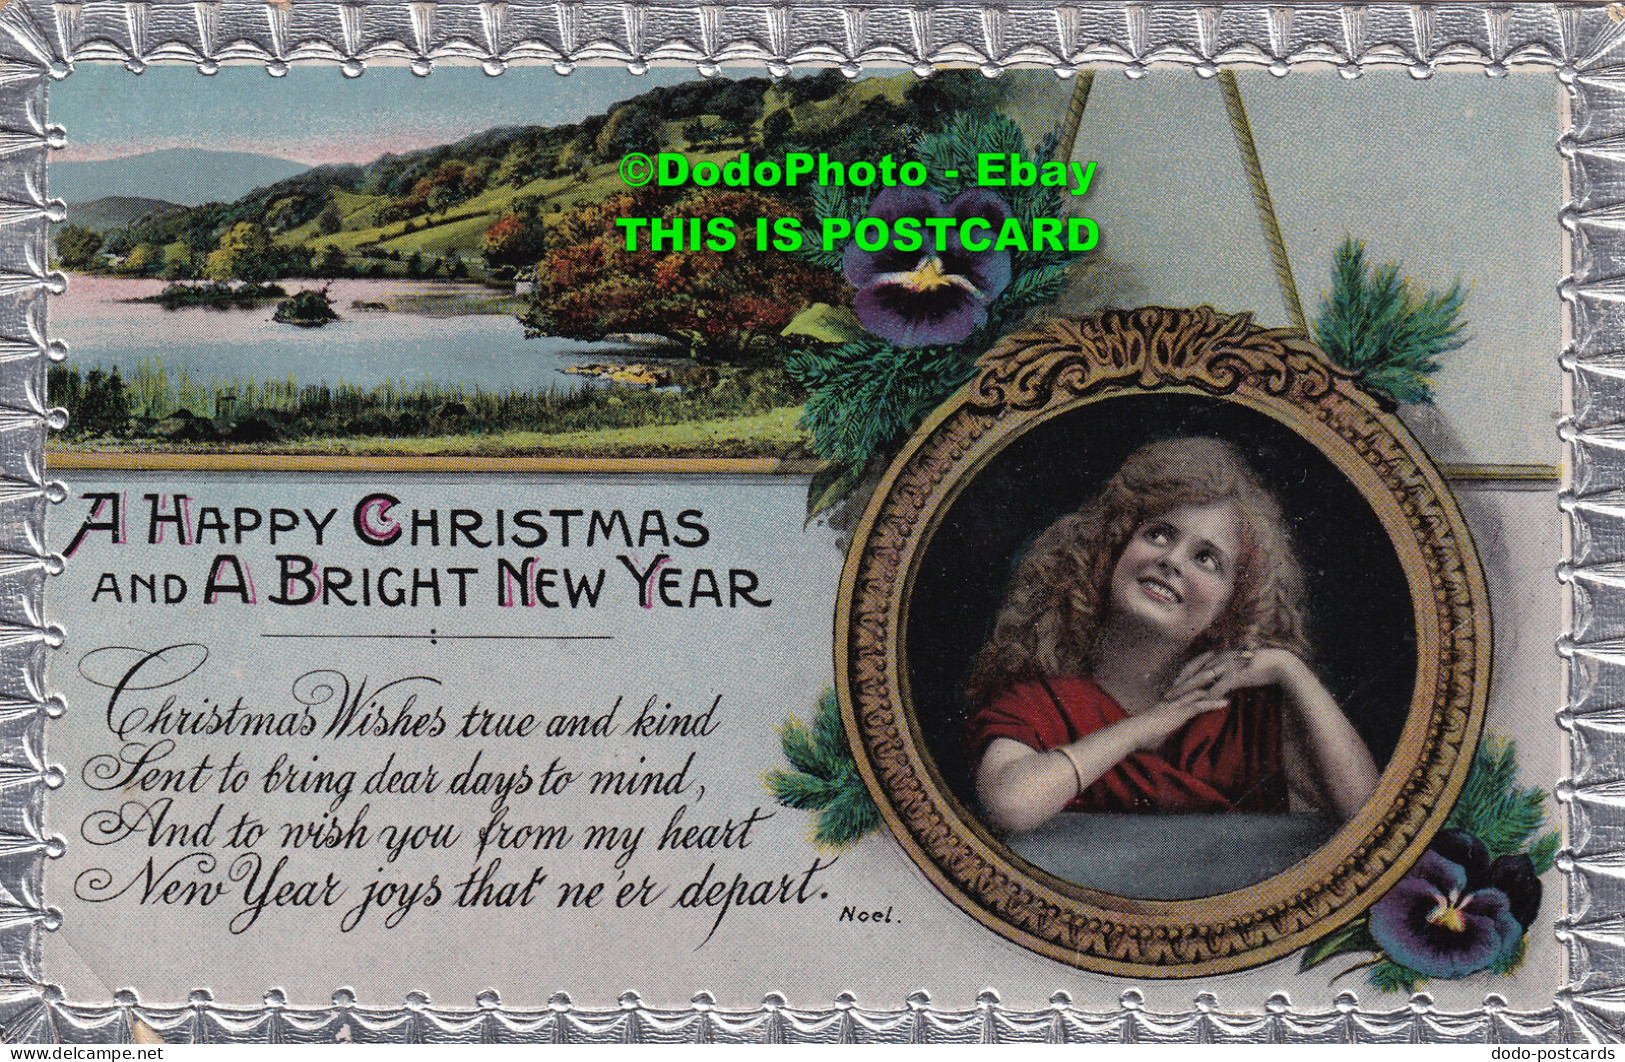 R455666 A Happy Christmas And A Bright New Year. Christmas Wishes True And Kind - Monde